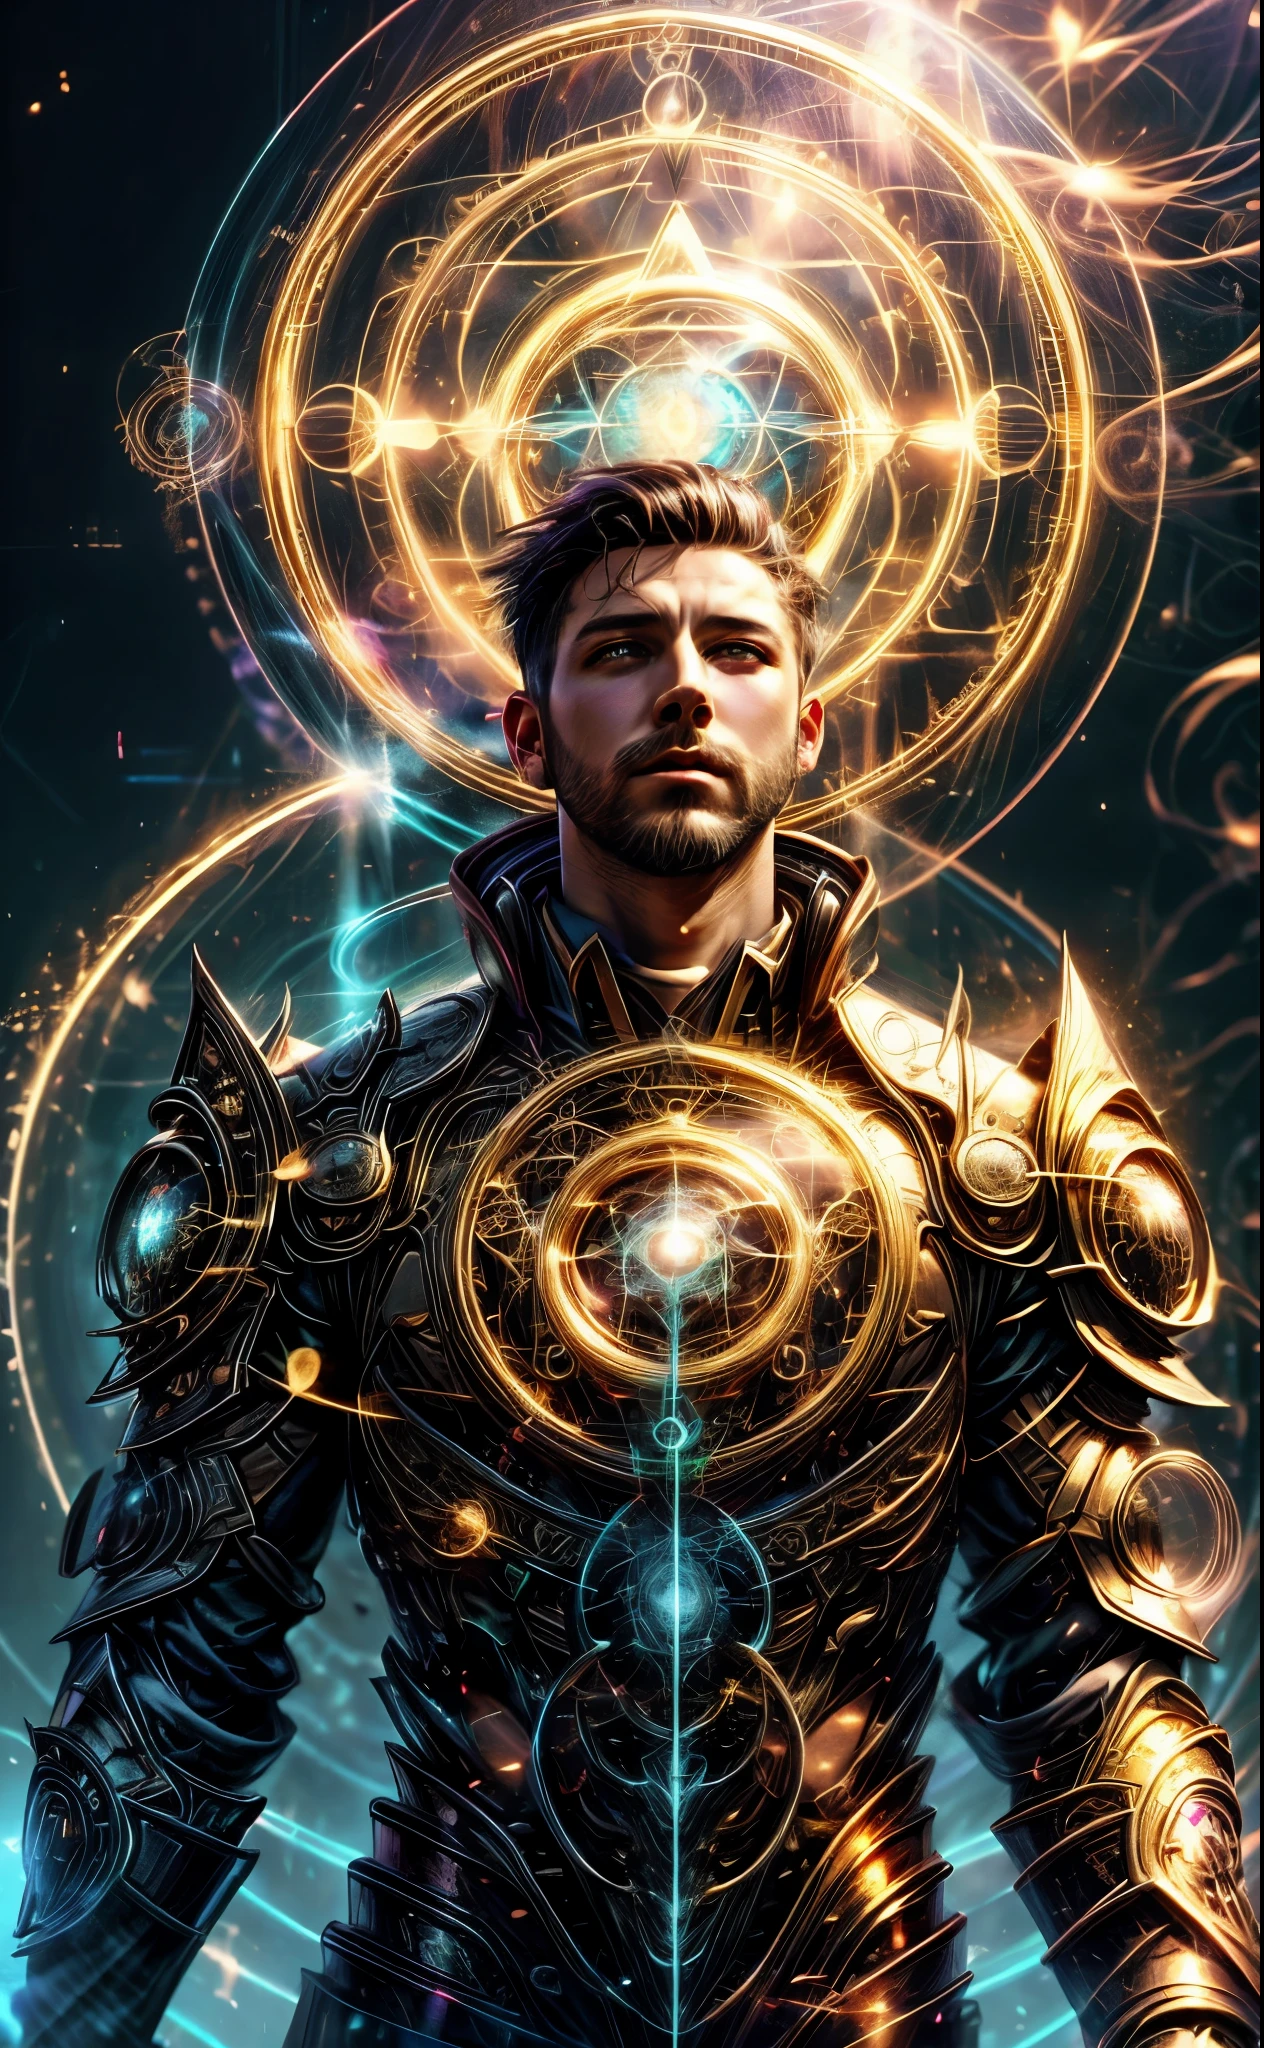 masterpiece, best quality,  1 boy, adult  man,  purple eyes, natural white messy hair,
Style-GravityMagic, portrait,  looking up, solo, upper body, detailed background, (scifi,  magic circle, glyphtech theme:1.1),  arcane sorcerer,  gold armor, ornate relic, determined expression, casting spell,  hair flowing in the wind, (yellow lightning ), magic hourglass,    exploding spell in background,